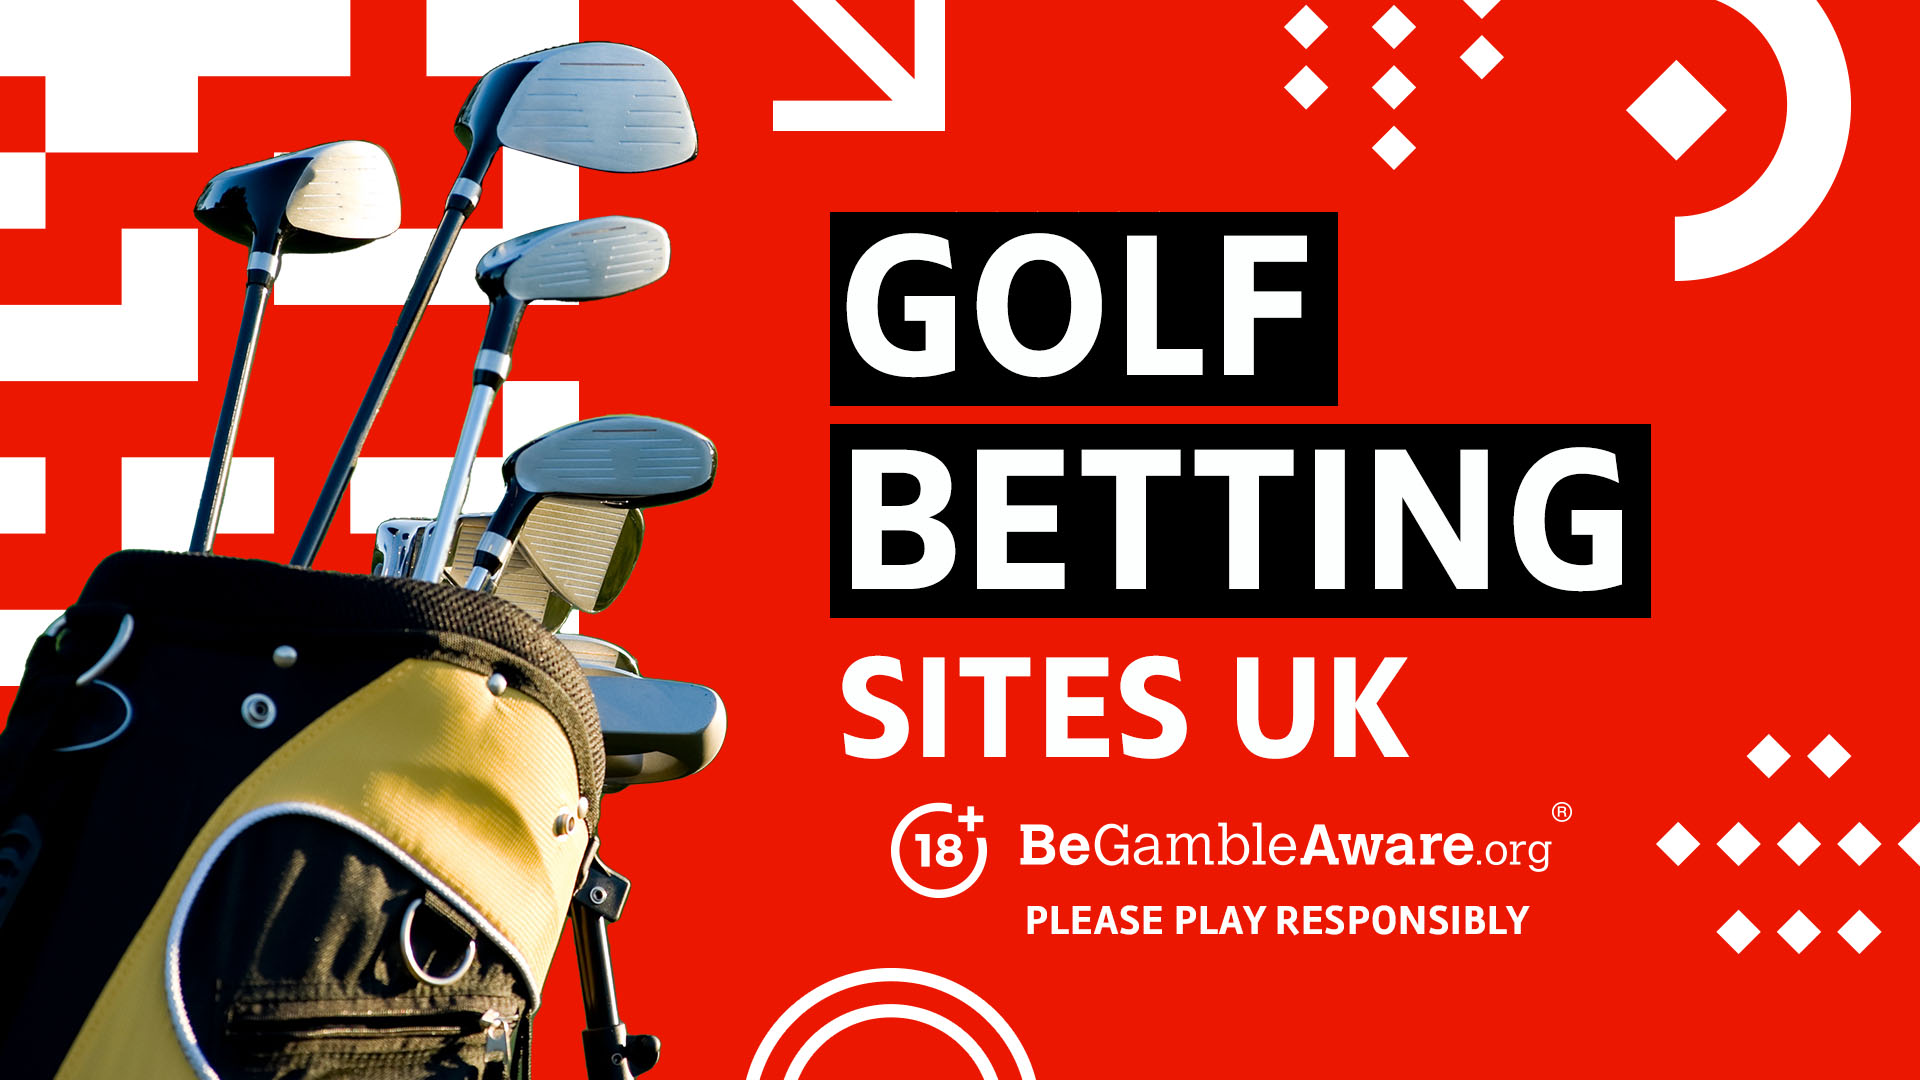 Photo: betting zone golf best bets